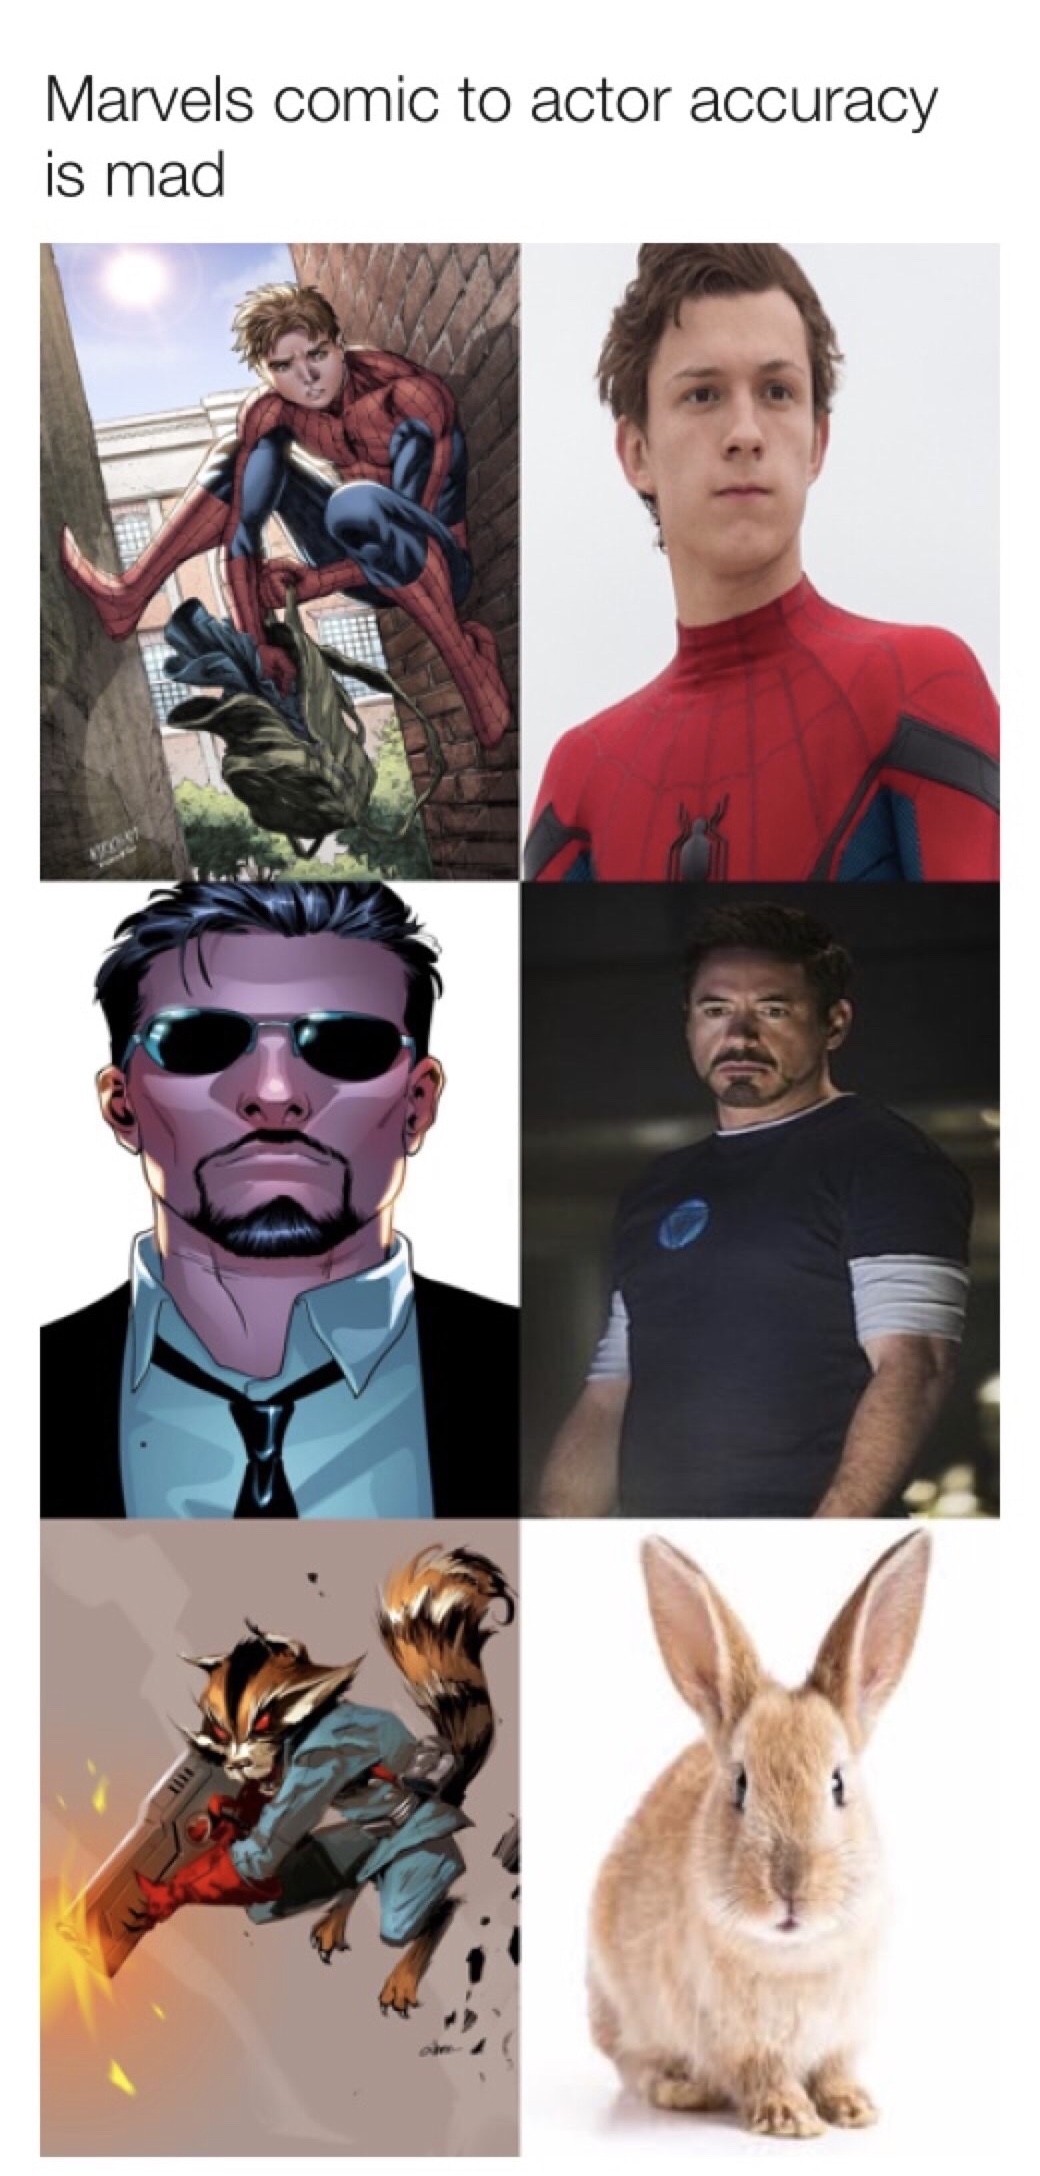 memes - marvel dank memes - Marvels comic to actor accuracy is mad